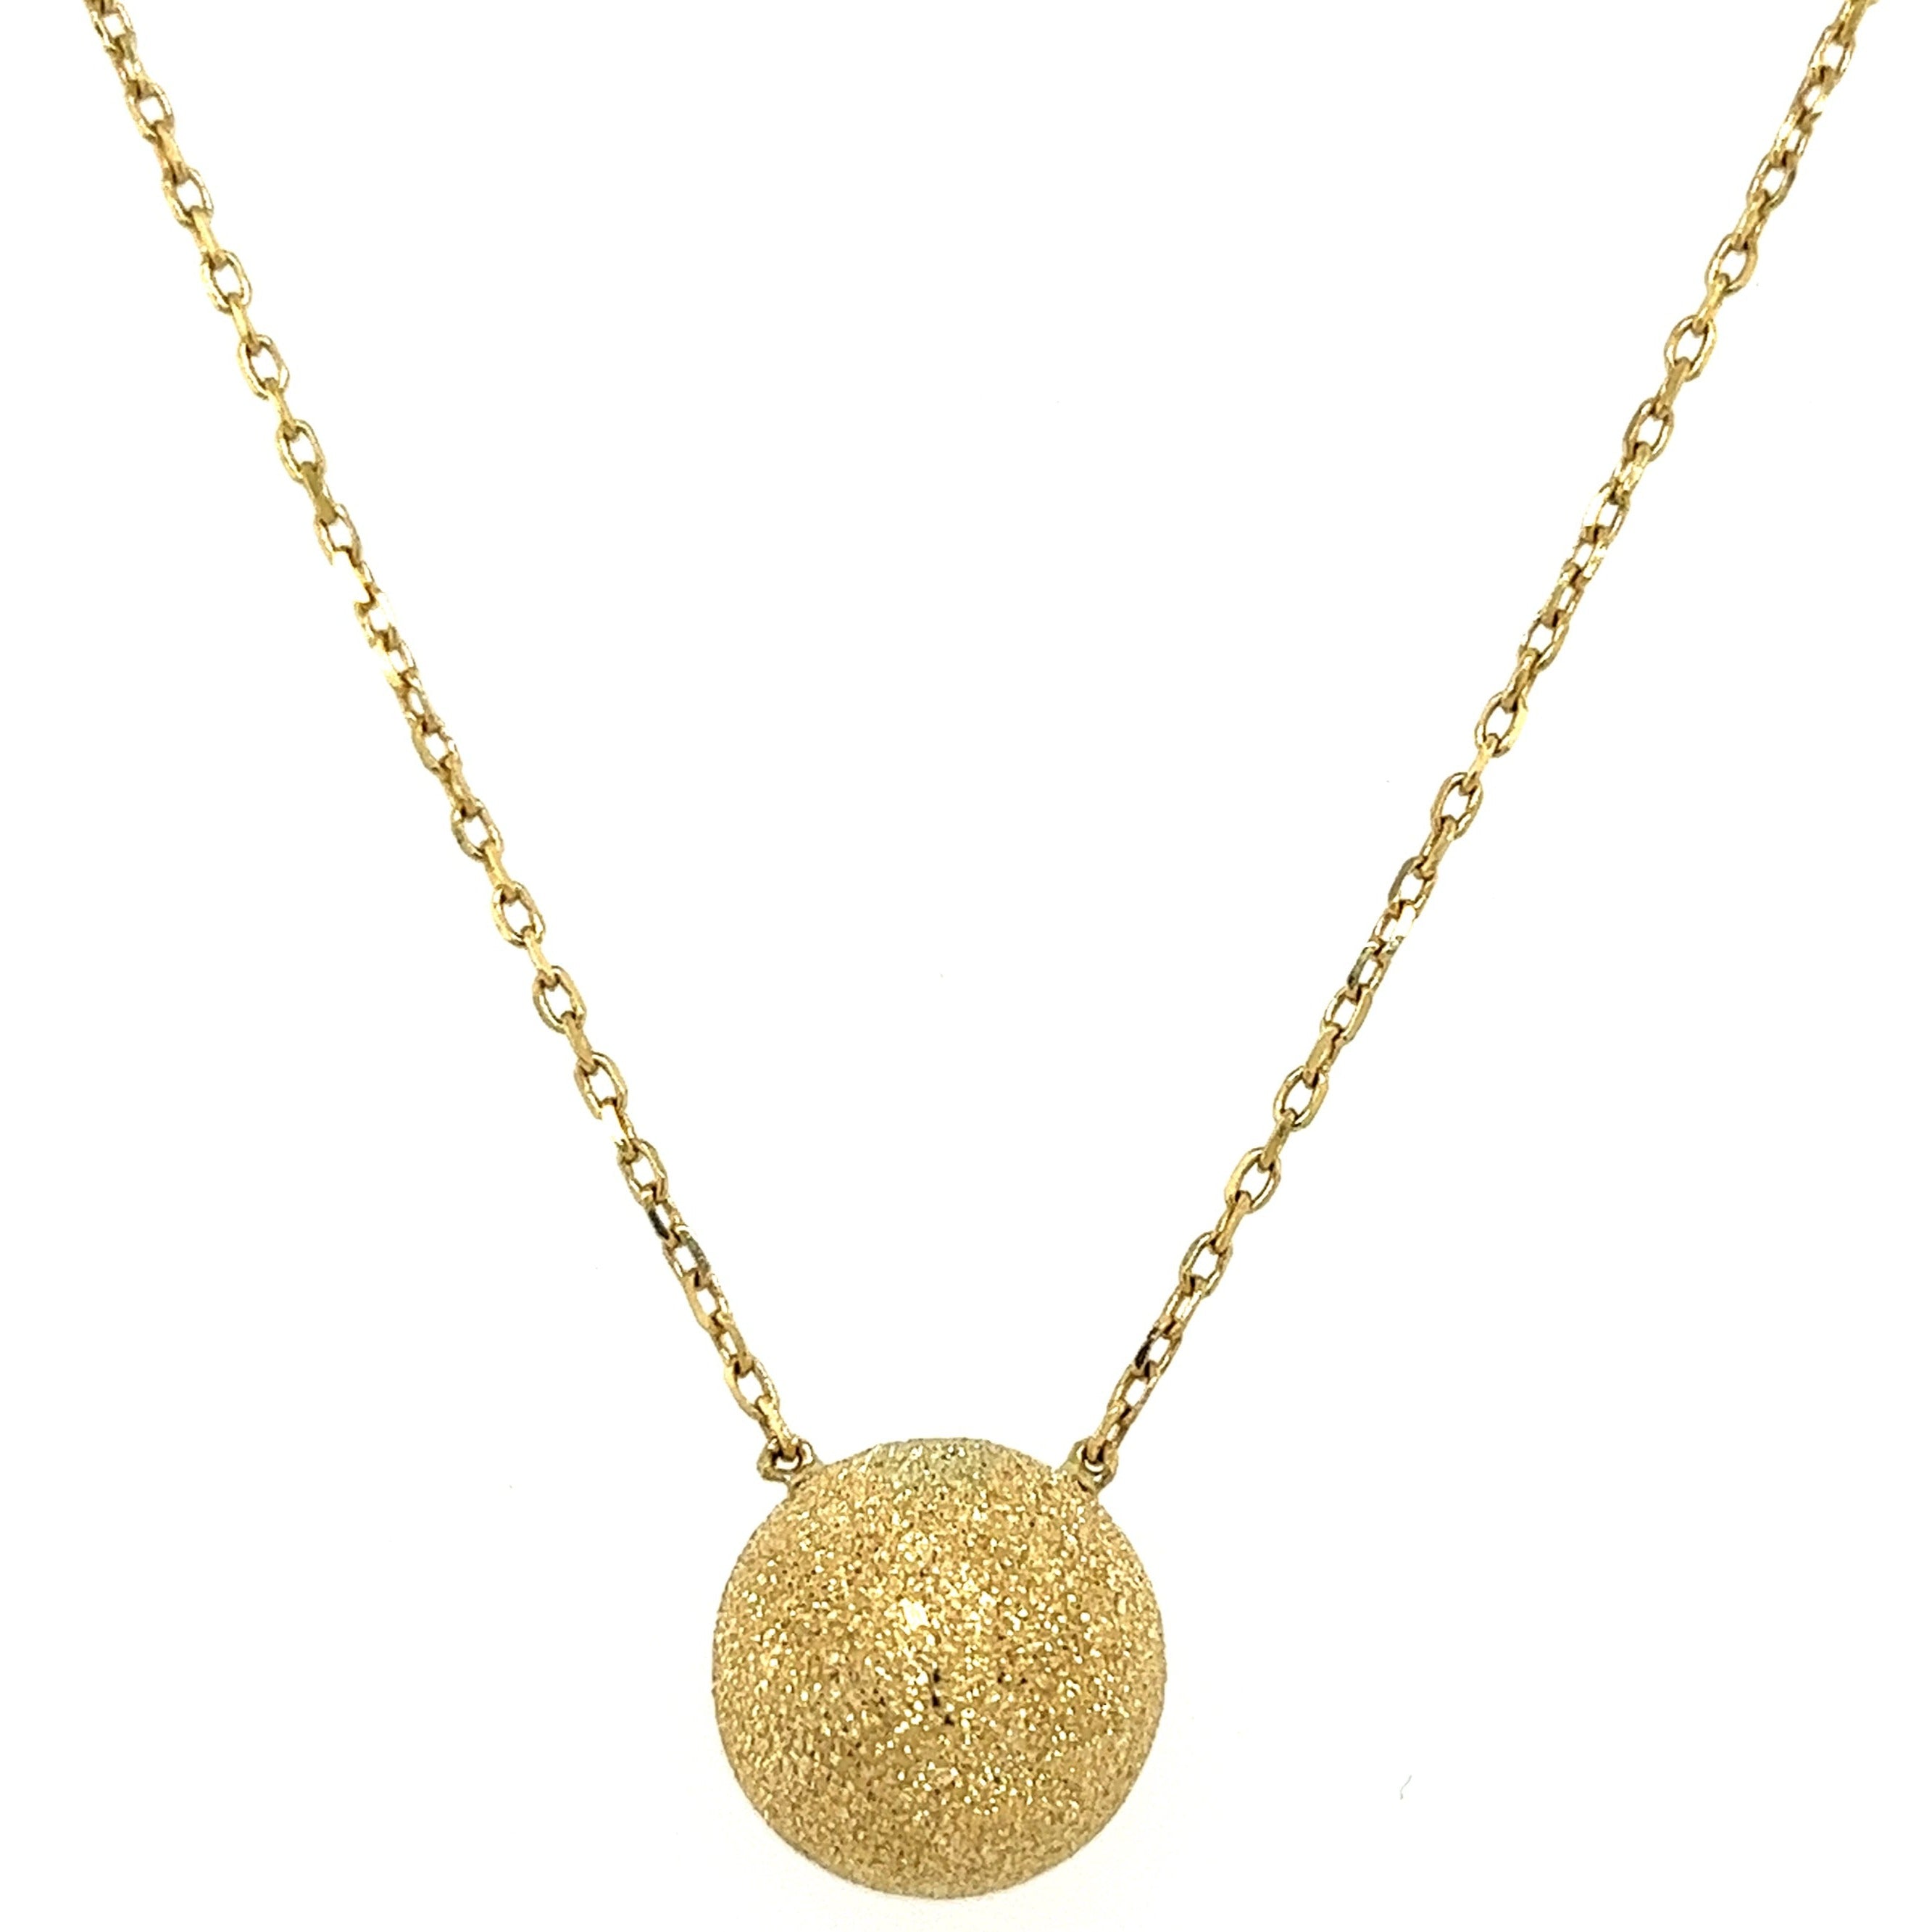 Beautiful dangling decorated golden ball Necklace in 18K Yellow Gold / J-p060ga